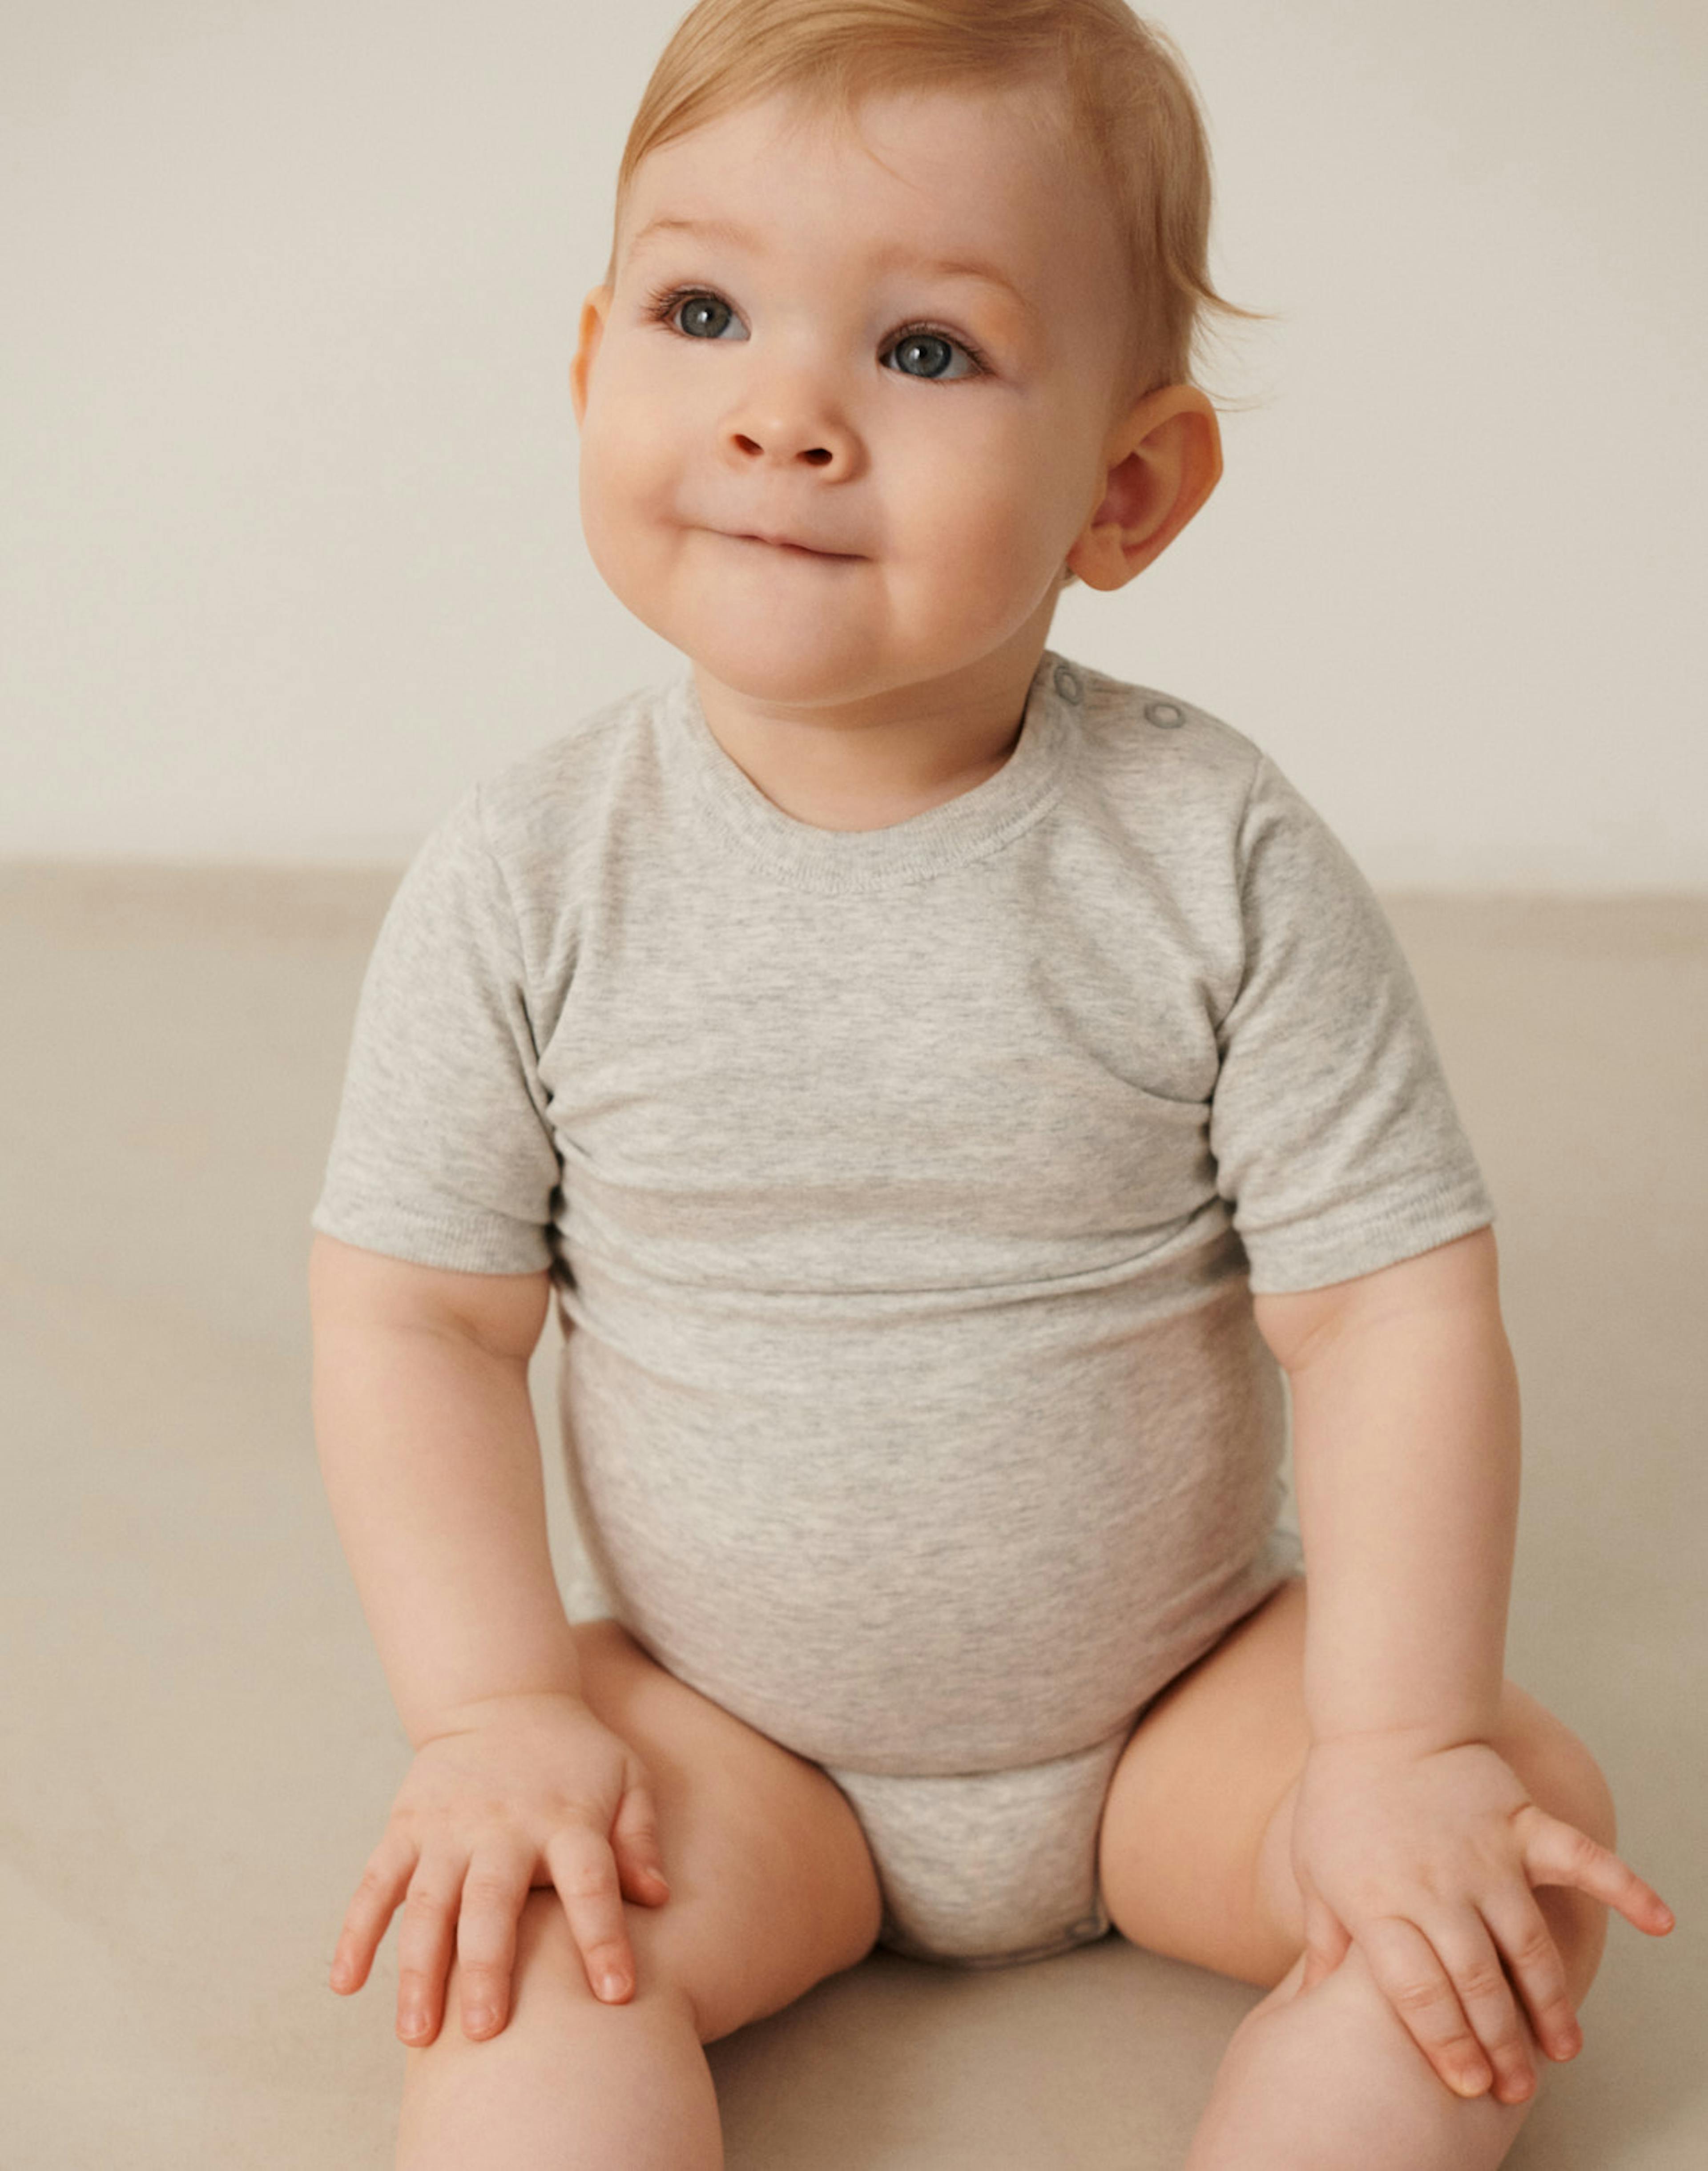 Cotton underwear of the highest quality for babies - Dilling